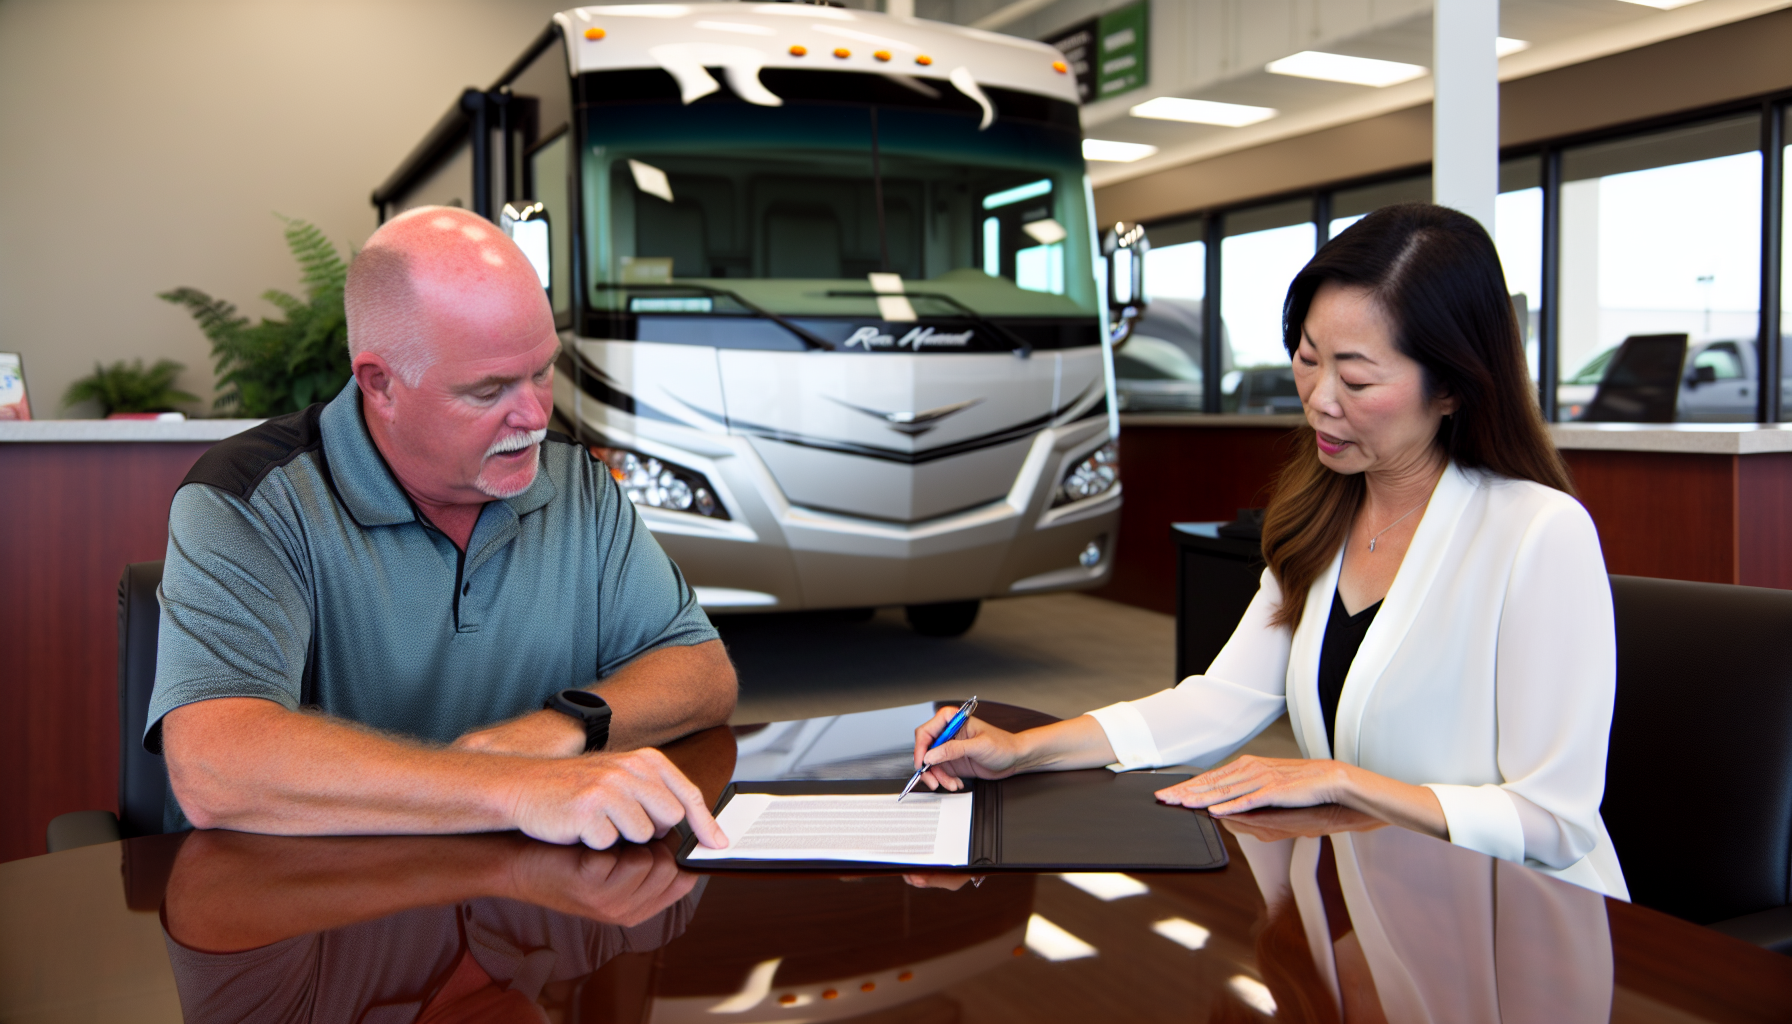 Purchasing an extended warranty at the time of buying a new RV